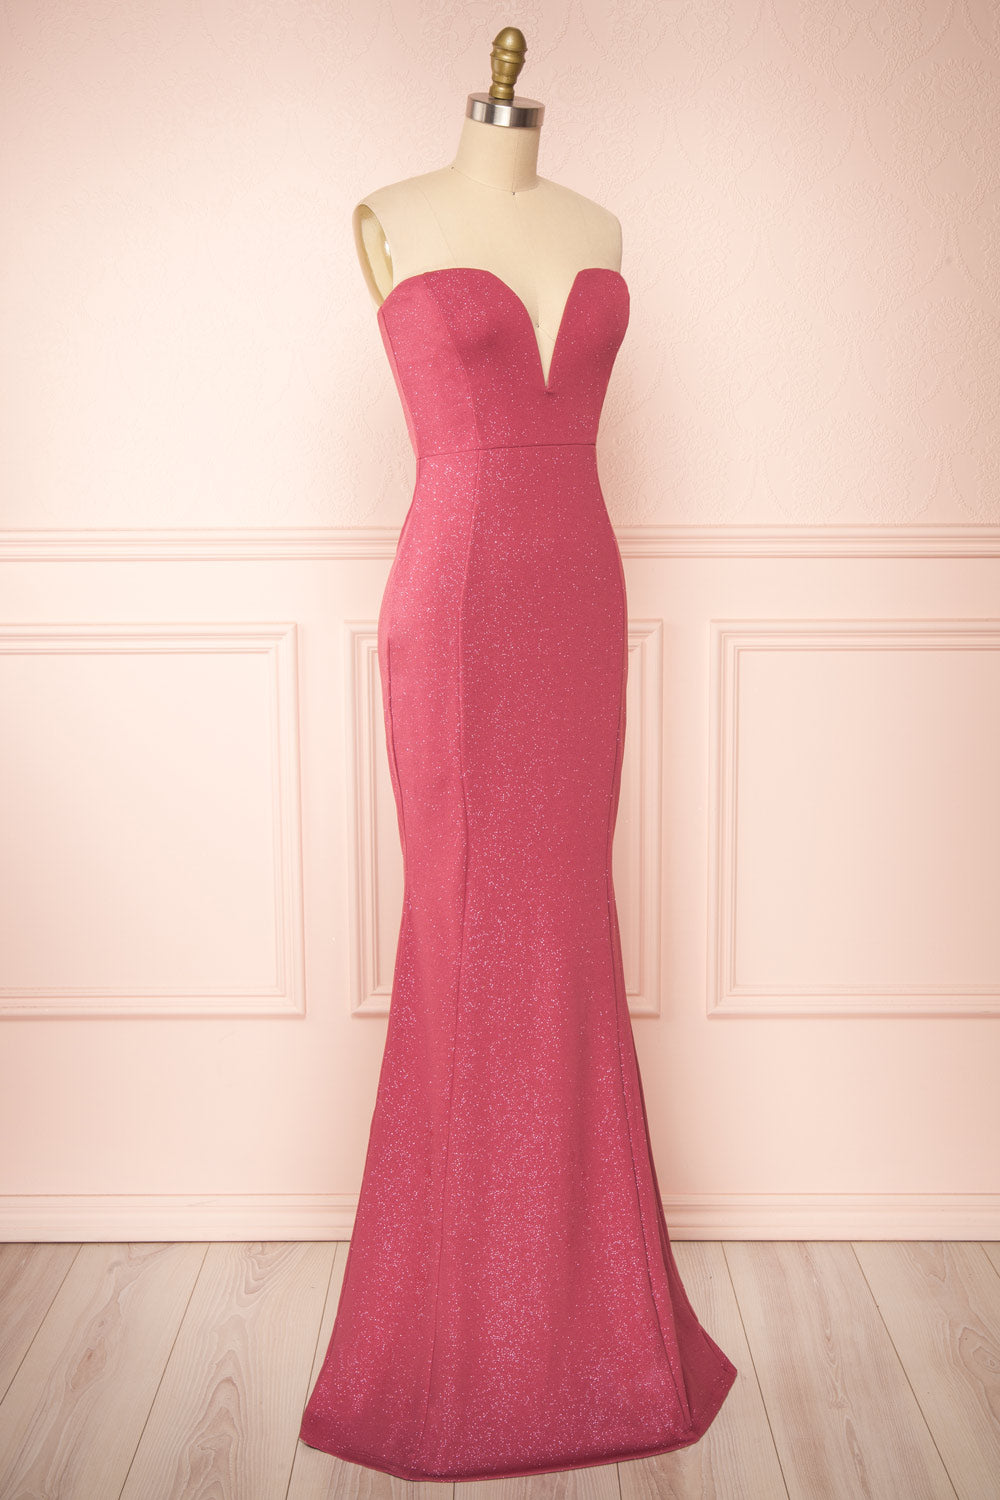 Norcia Pink Bustier Mermaid Maxi Dress | Boutique 1861 - Norcia Rose side view